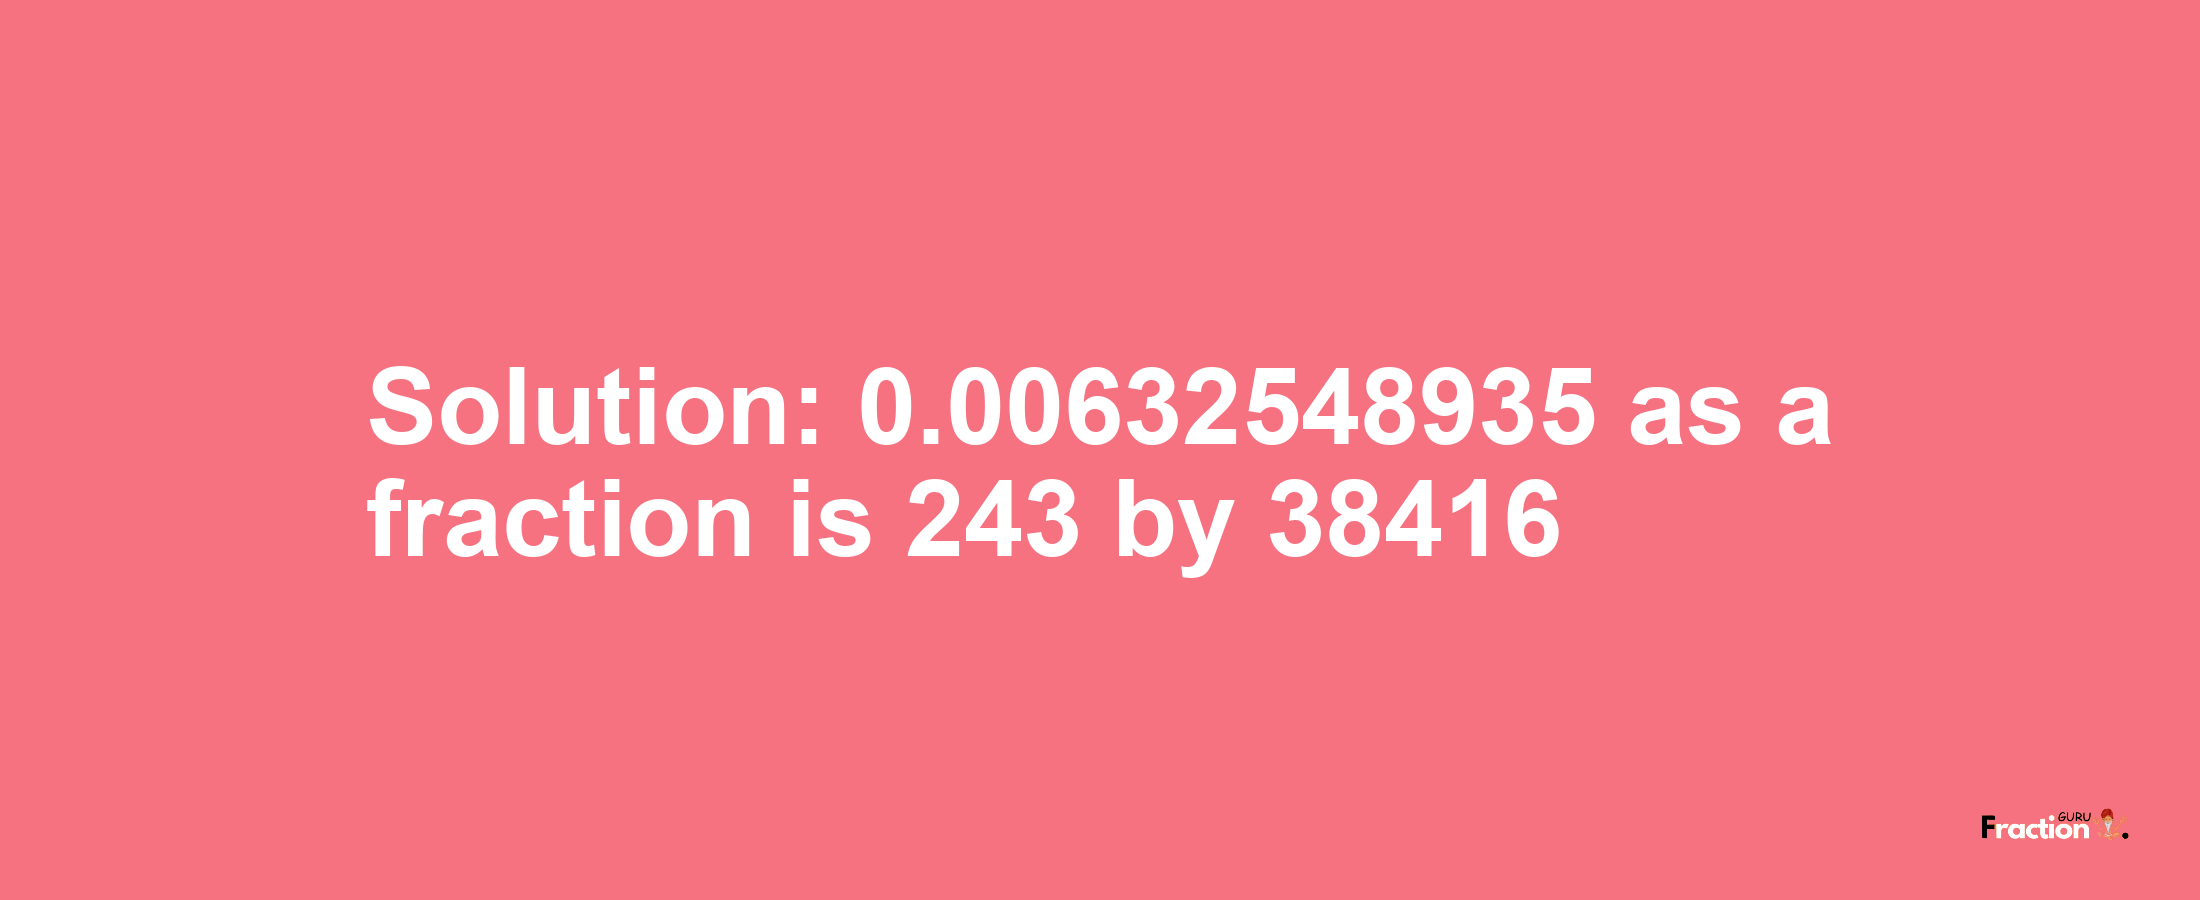 Solution:0.00632548935 as a fraction is 243/38416